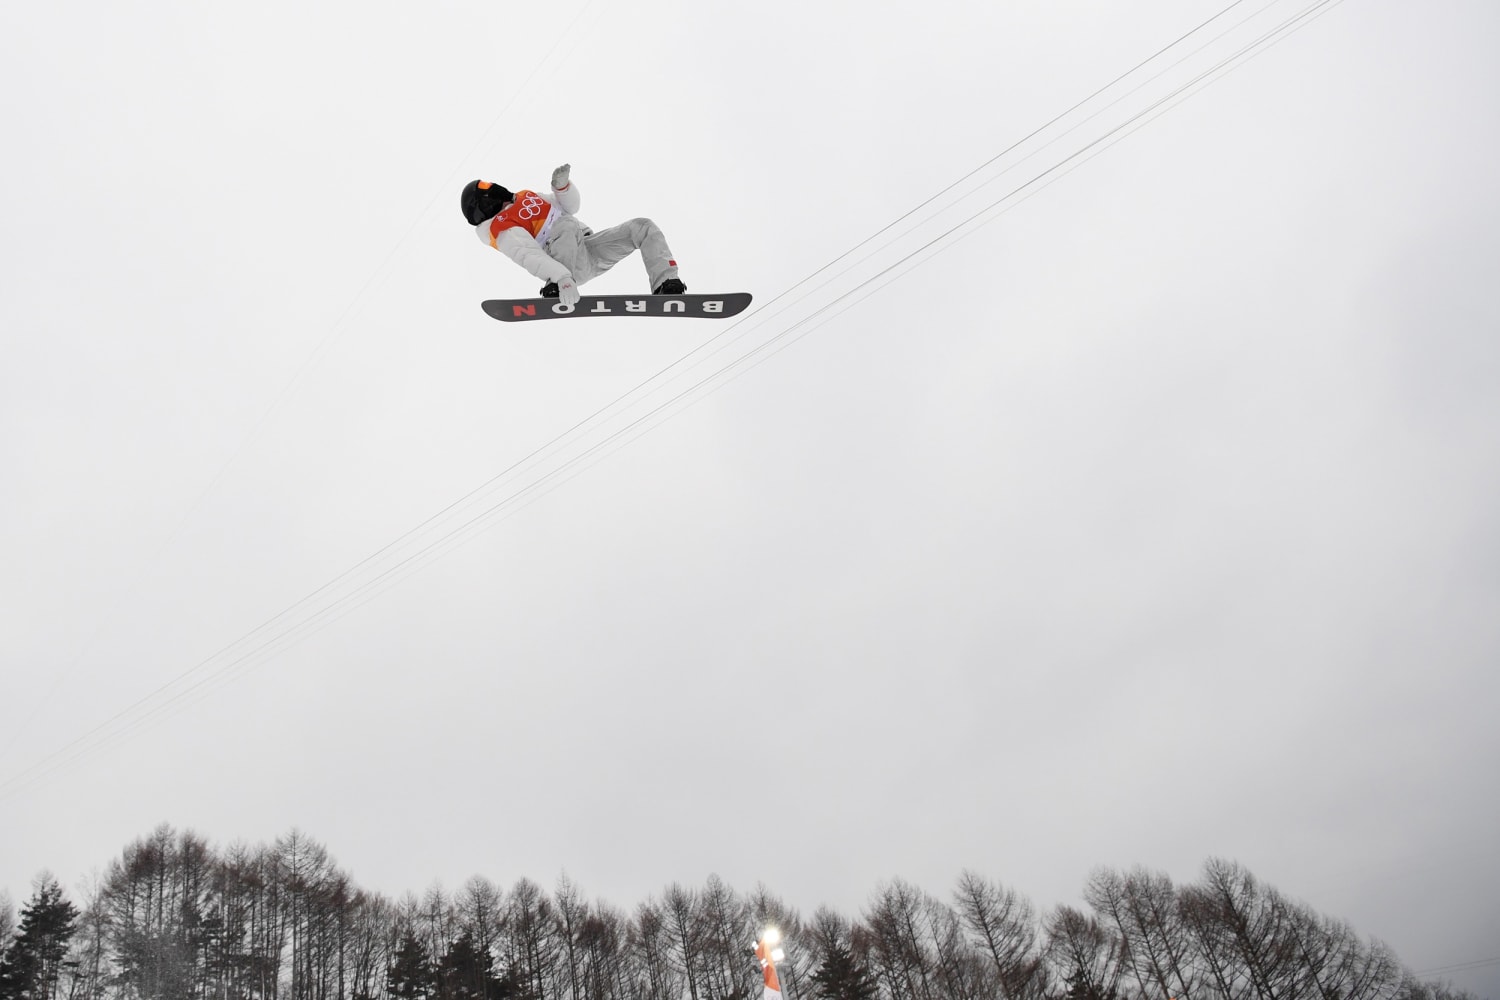 Olympic Moments: Shaun White soars to gold in snowboarding